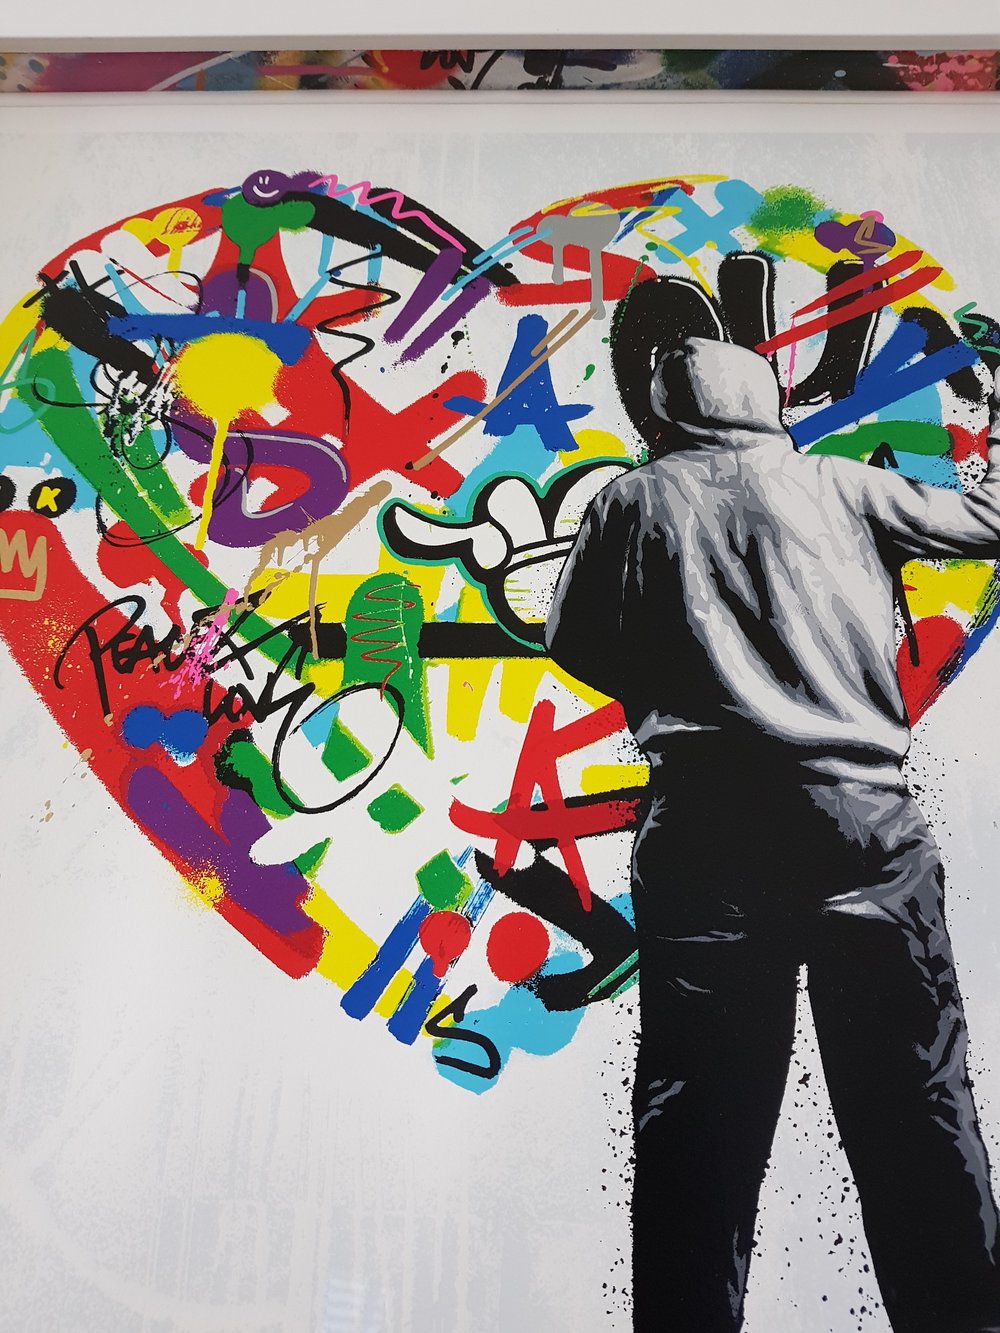 MARTIN WHATSON "PAINT LOVE"- FRAMED WITH CUSTOM SPACERS 24 COLOUR PRINT EDITION OF 150 - 55CM X 55CM